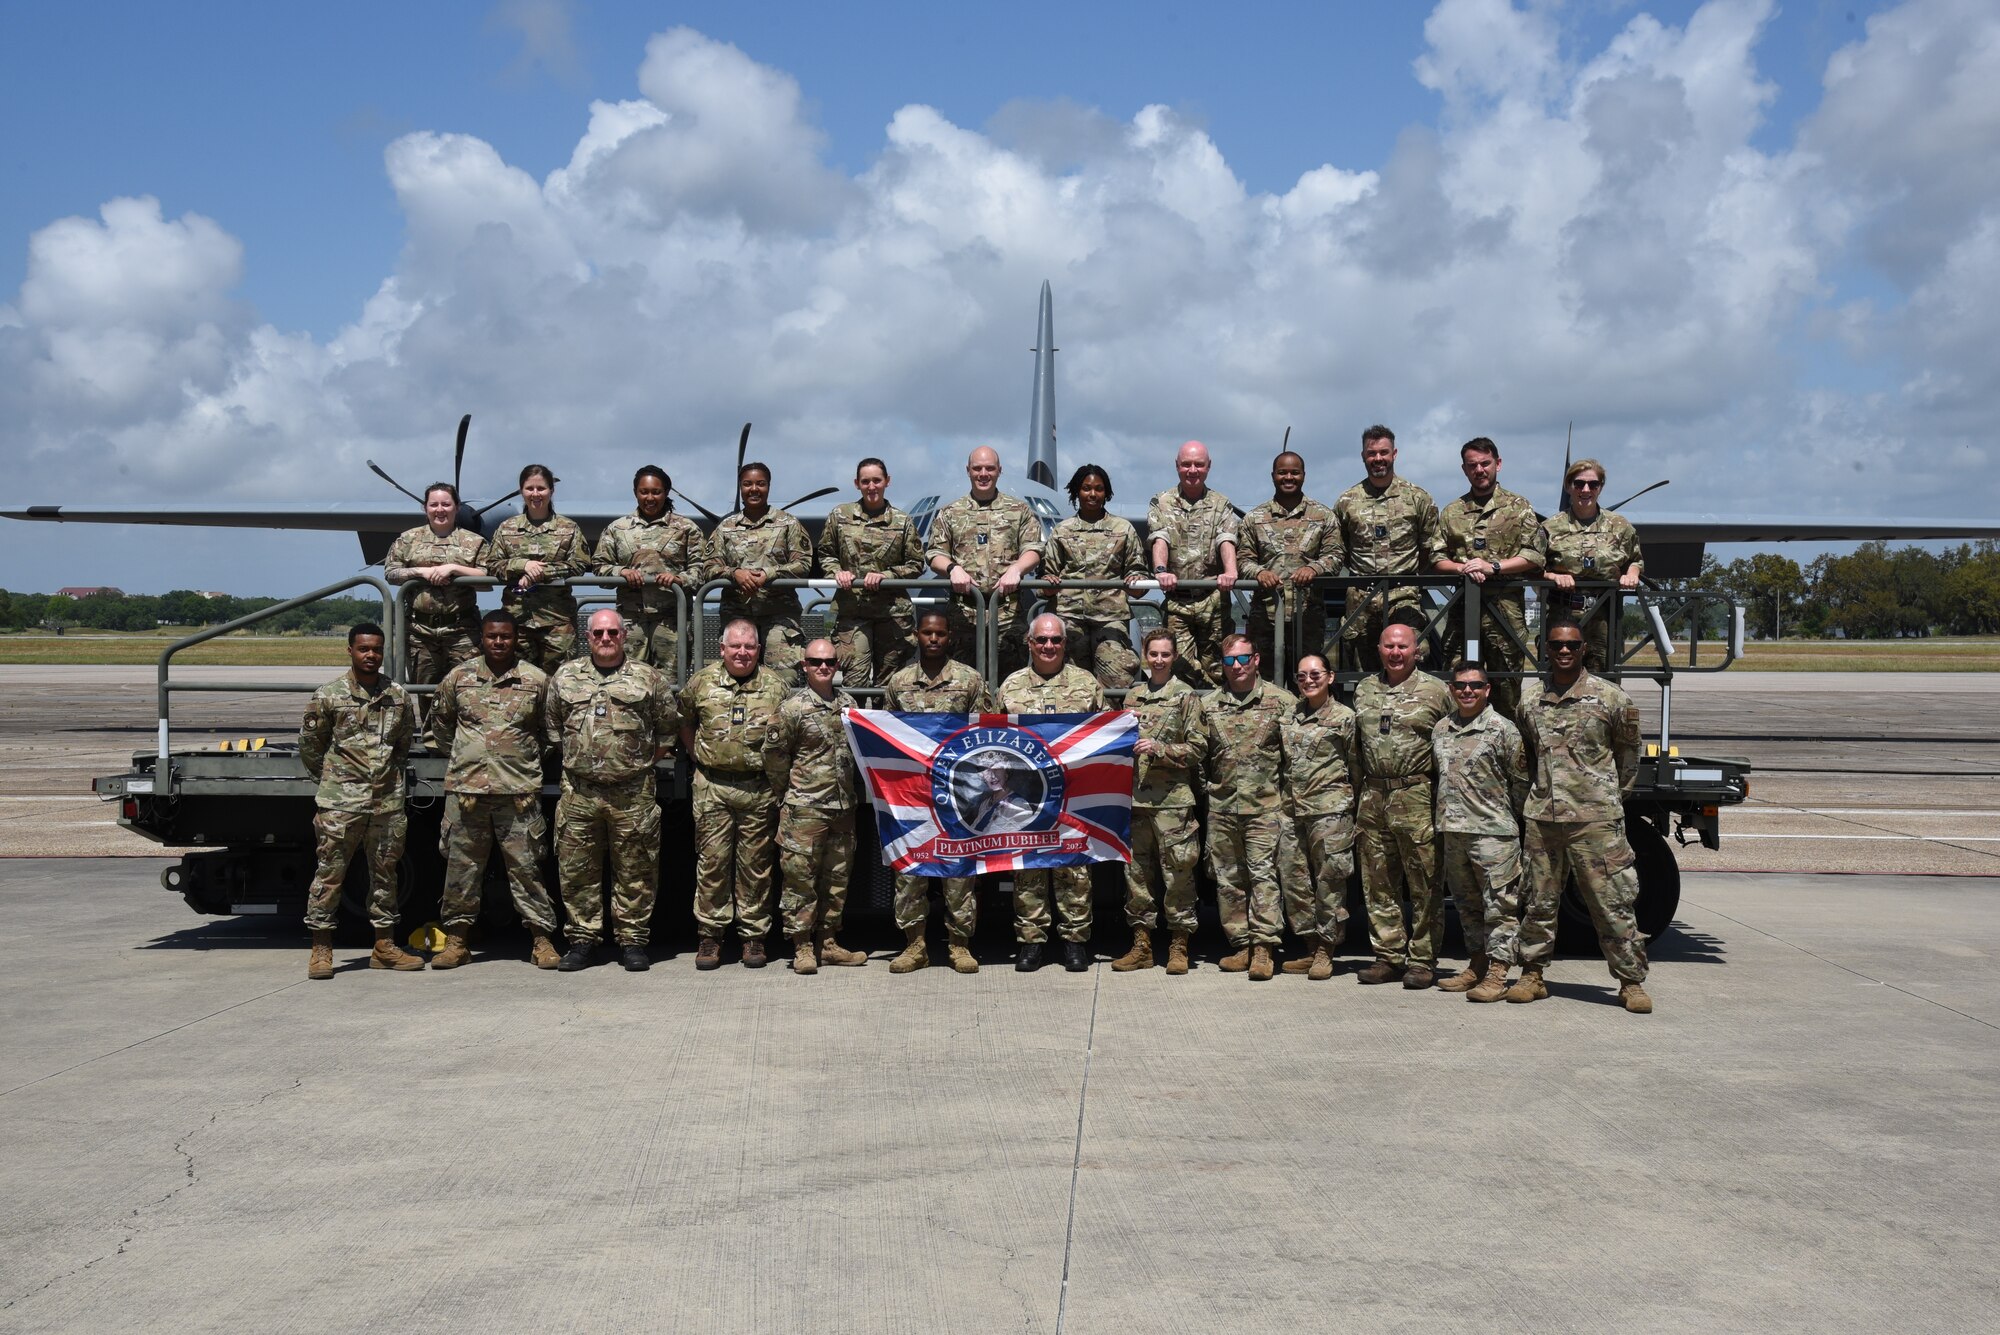 Group photo of all members of the British Royal Air Force Reserve 4624th Squadron and the 41st Aerial Port Squadron members that were present during the visit on and in front of a K-loader.